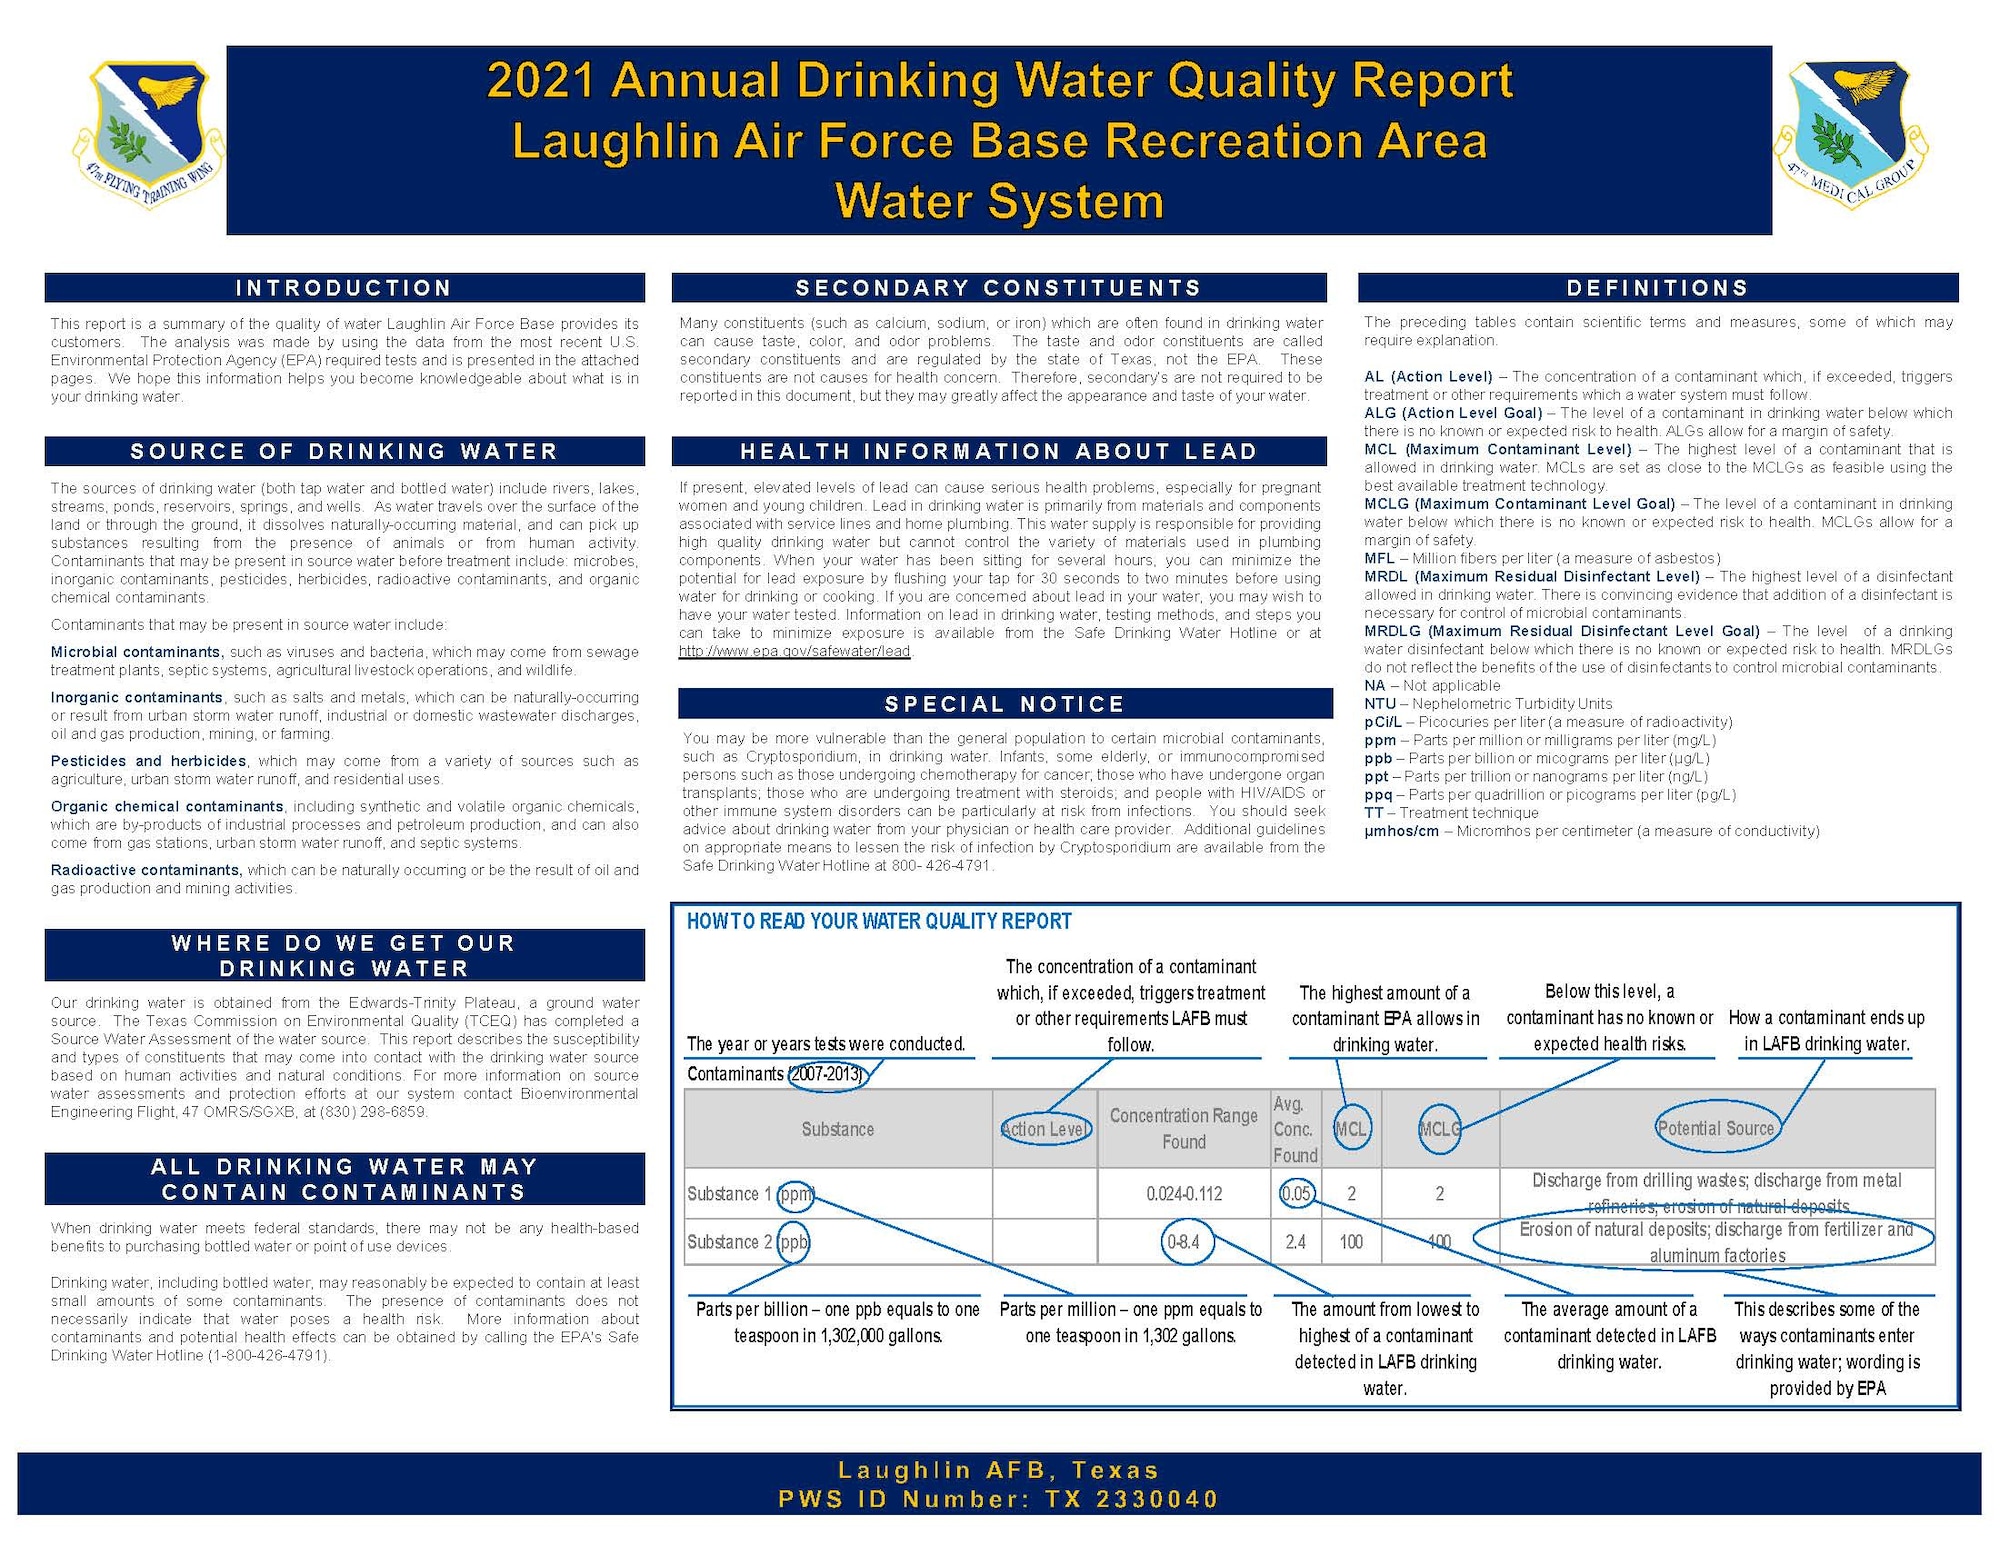 2021 Annual Drinking Water Quality Report for the Laughlin Air Force Base Recreation Area Water System.